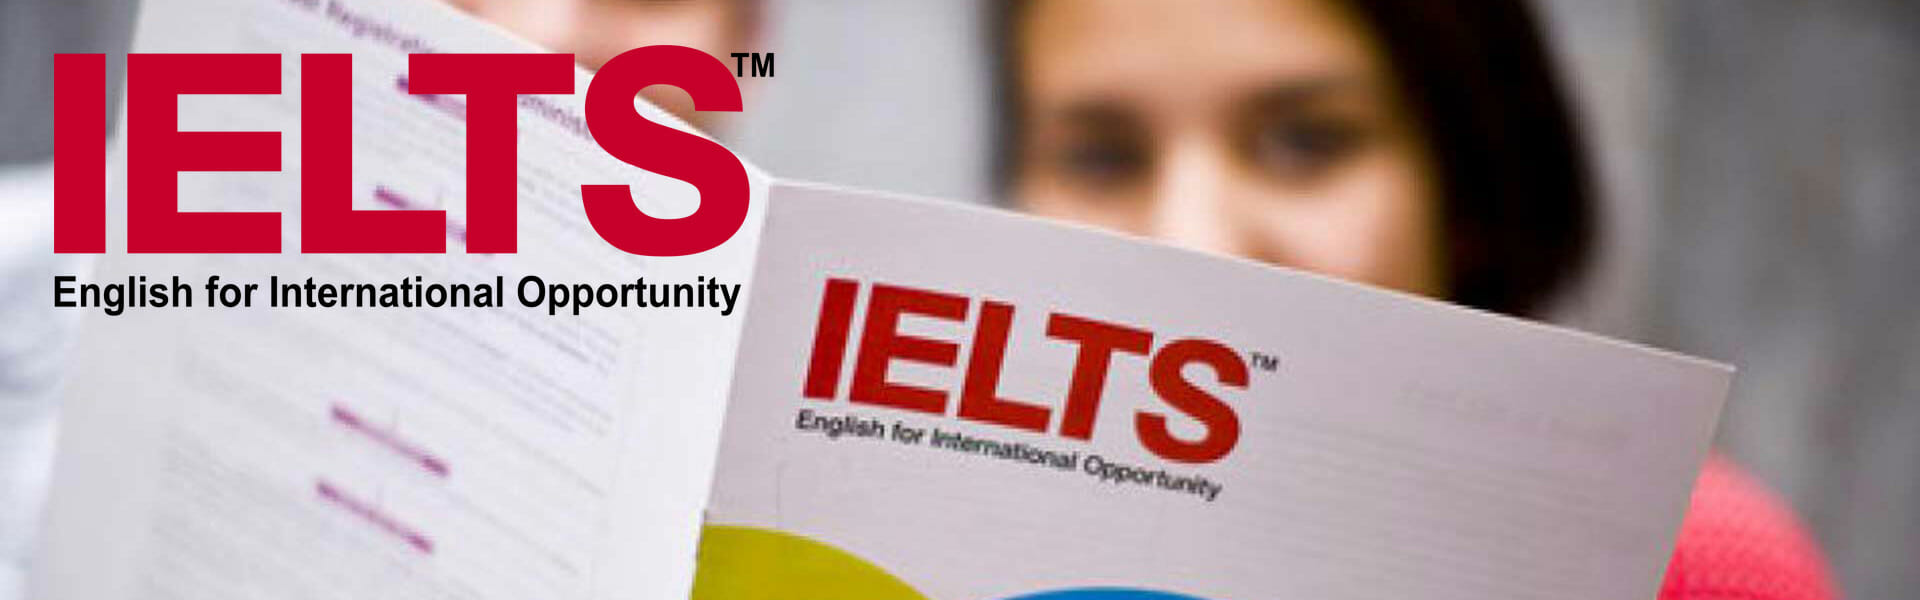 IELTS coaching By Certified Trainer  | Right Directions | IELTS coaching in morinda ,best IELTS coaching in morinda, best IELTS institute in morinda, IELTS trainer  in morinda - GL100802